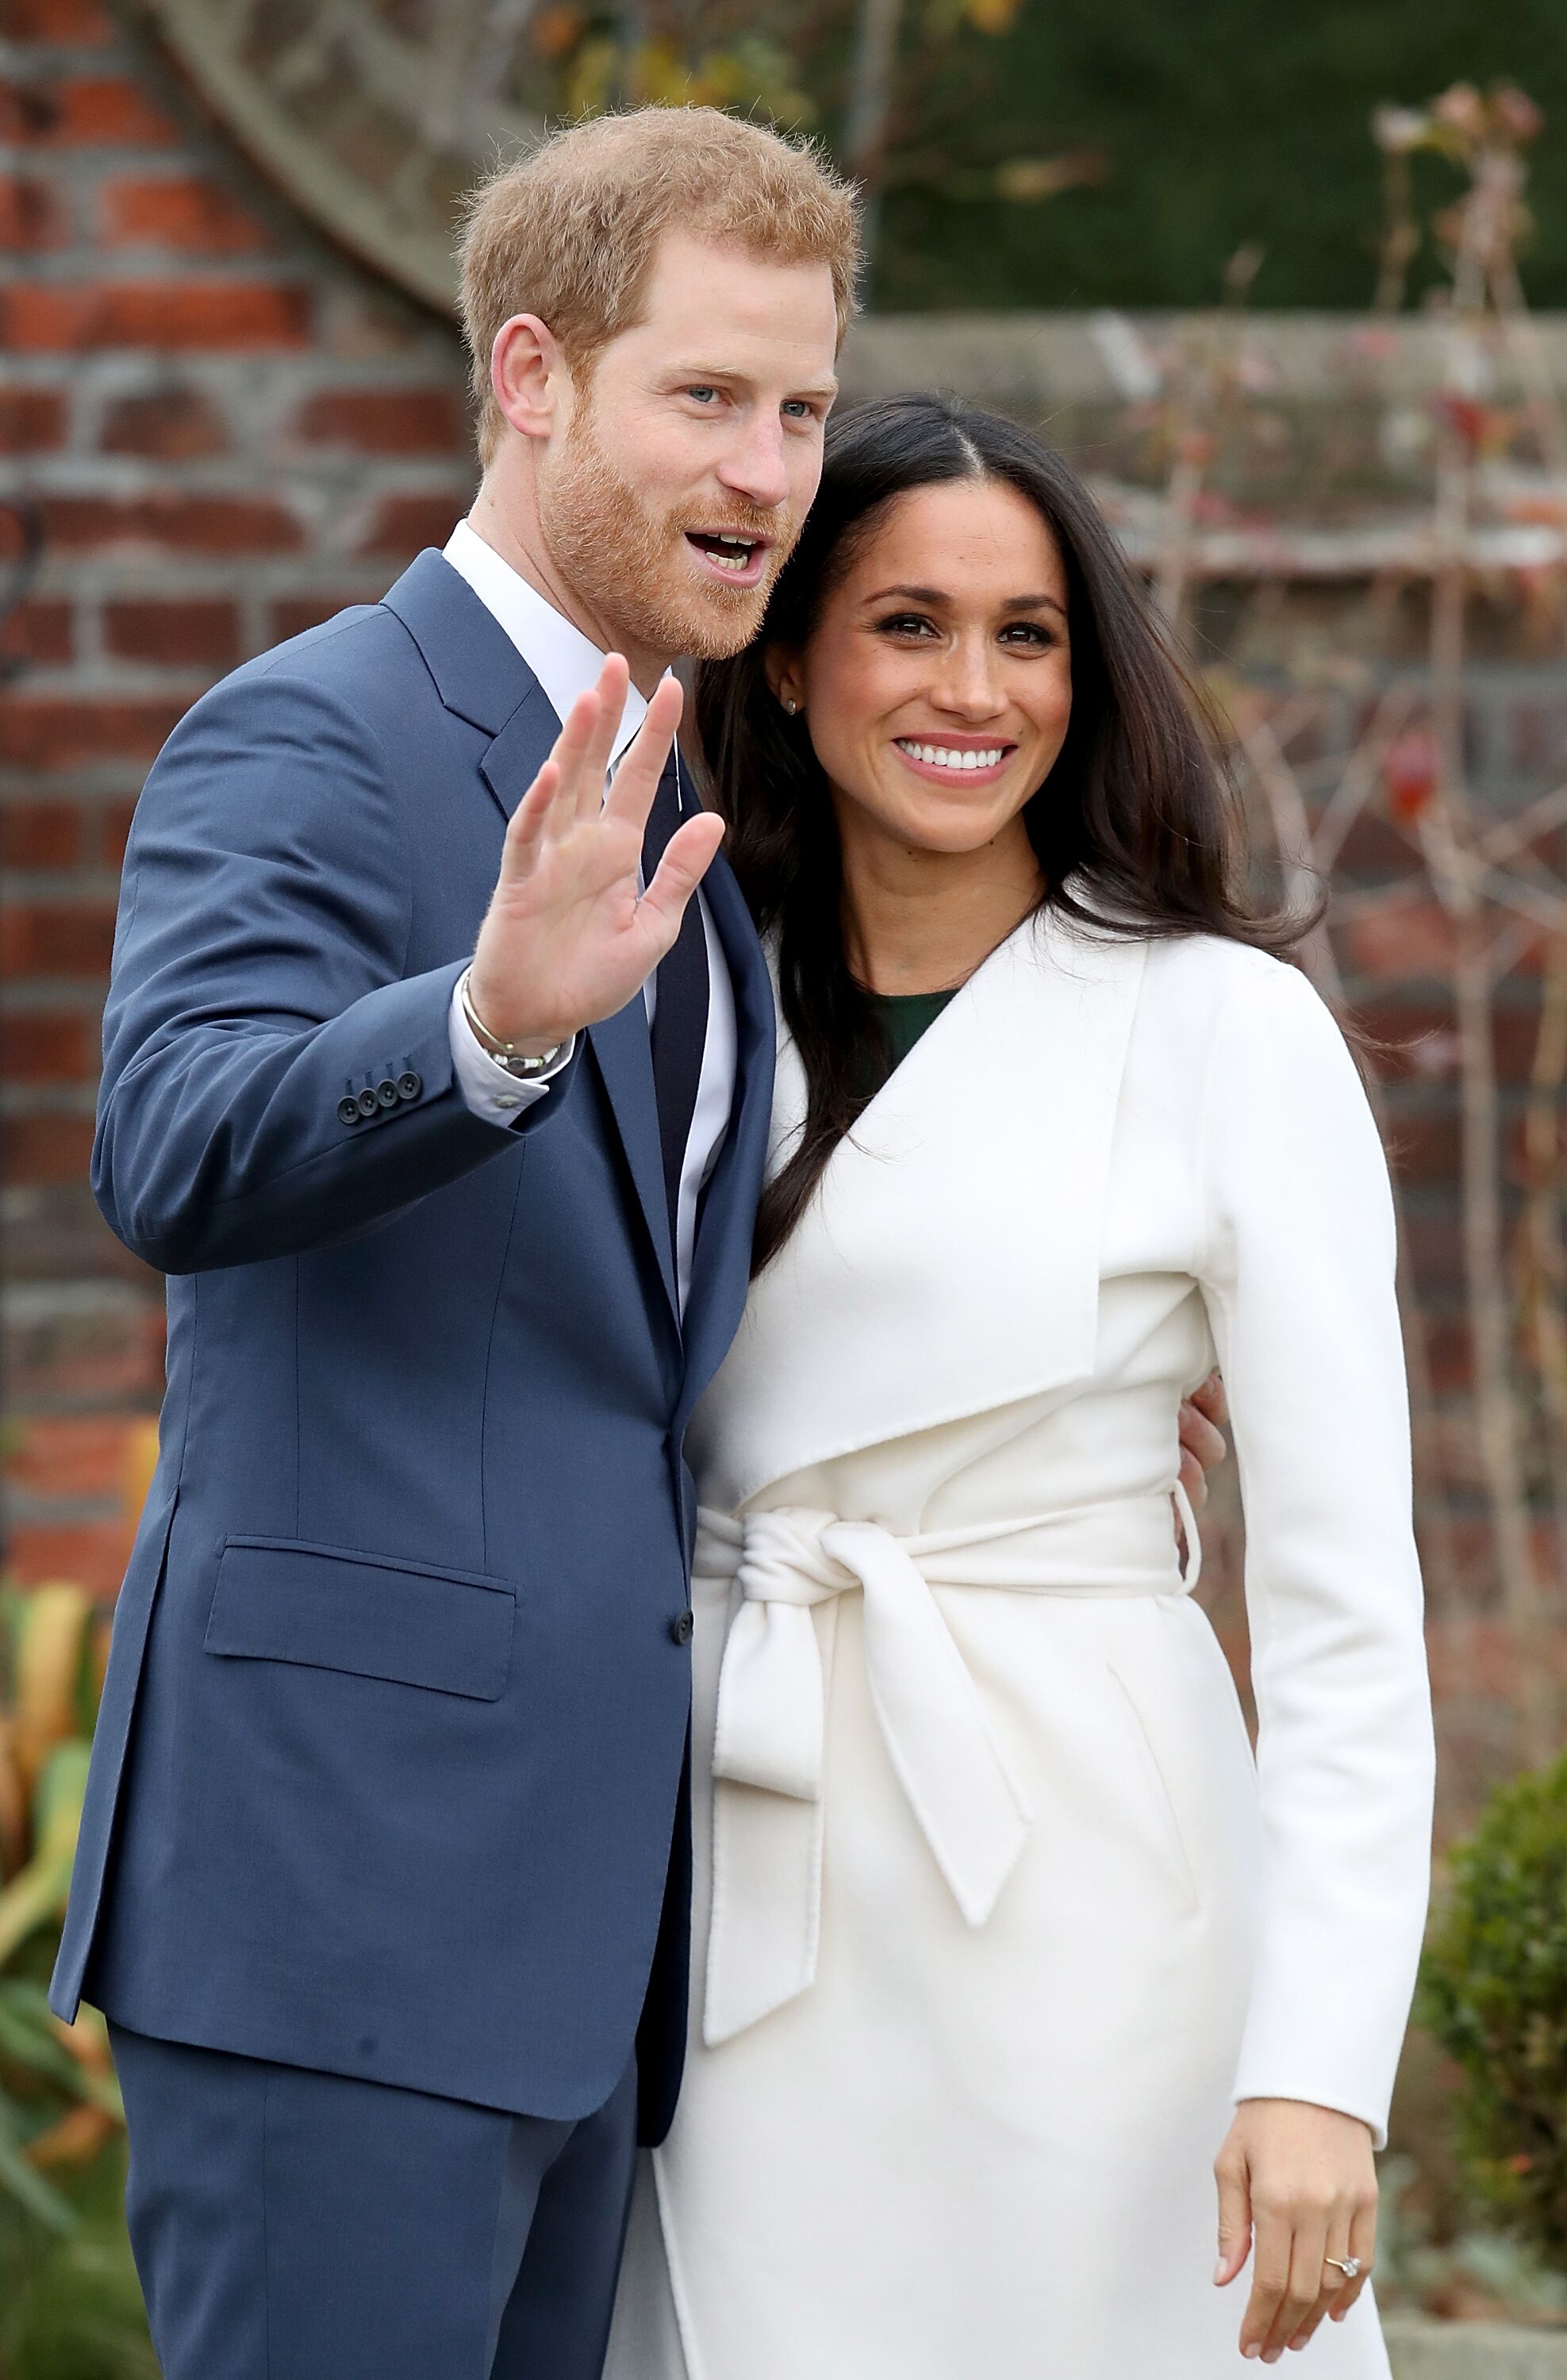  Prince Harry and Meghan Markle announce their engagement at The Sunken Gardens at Kensington Palace in 2017 in London | Source: Getty Images